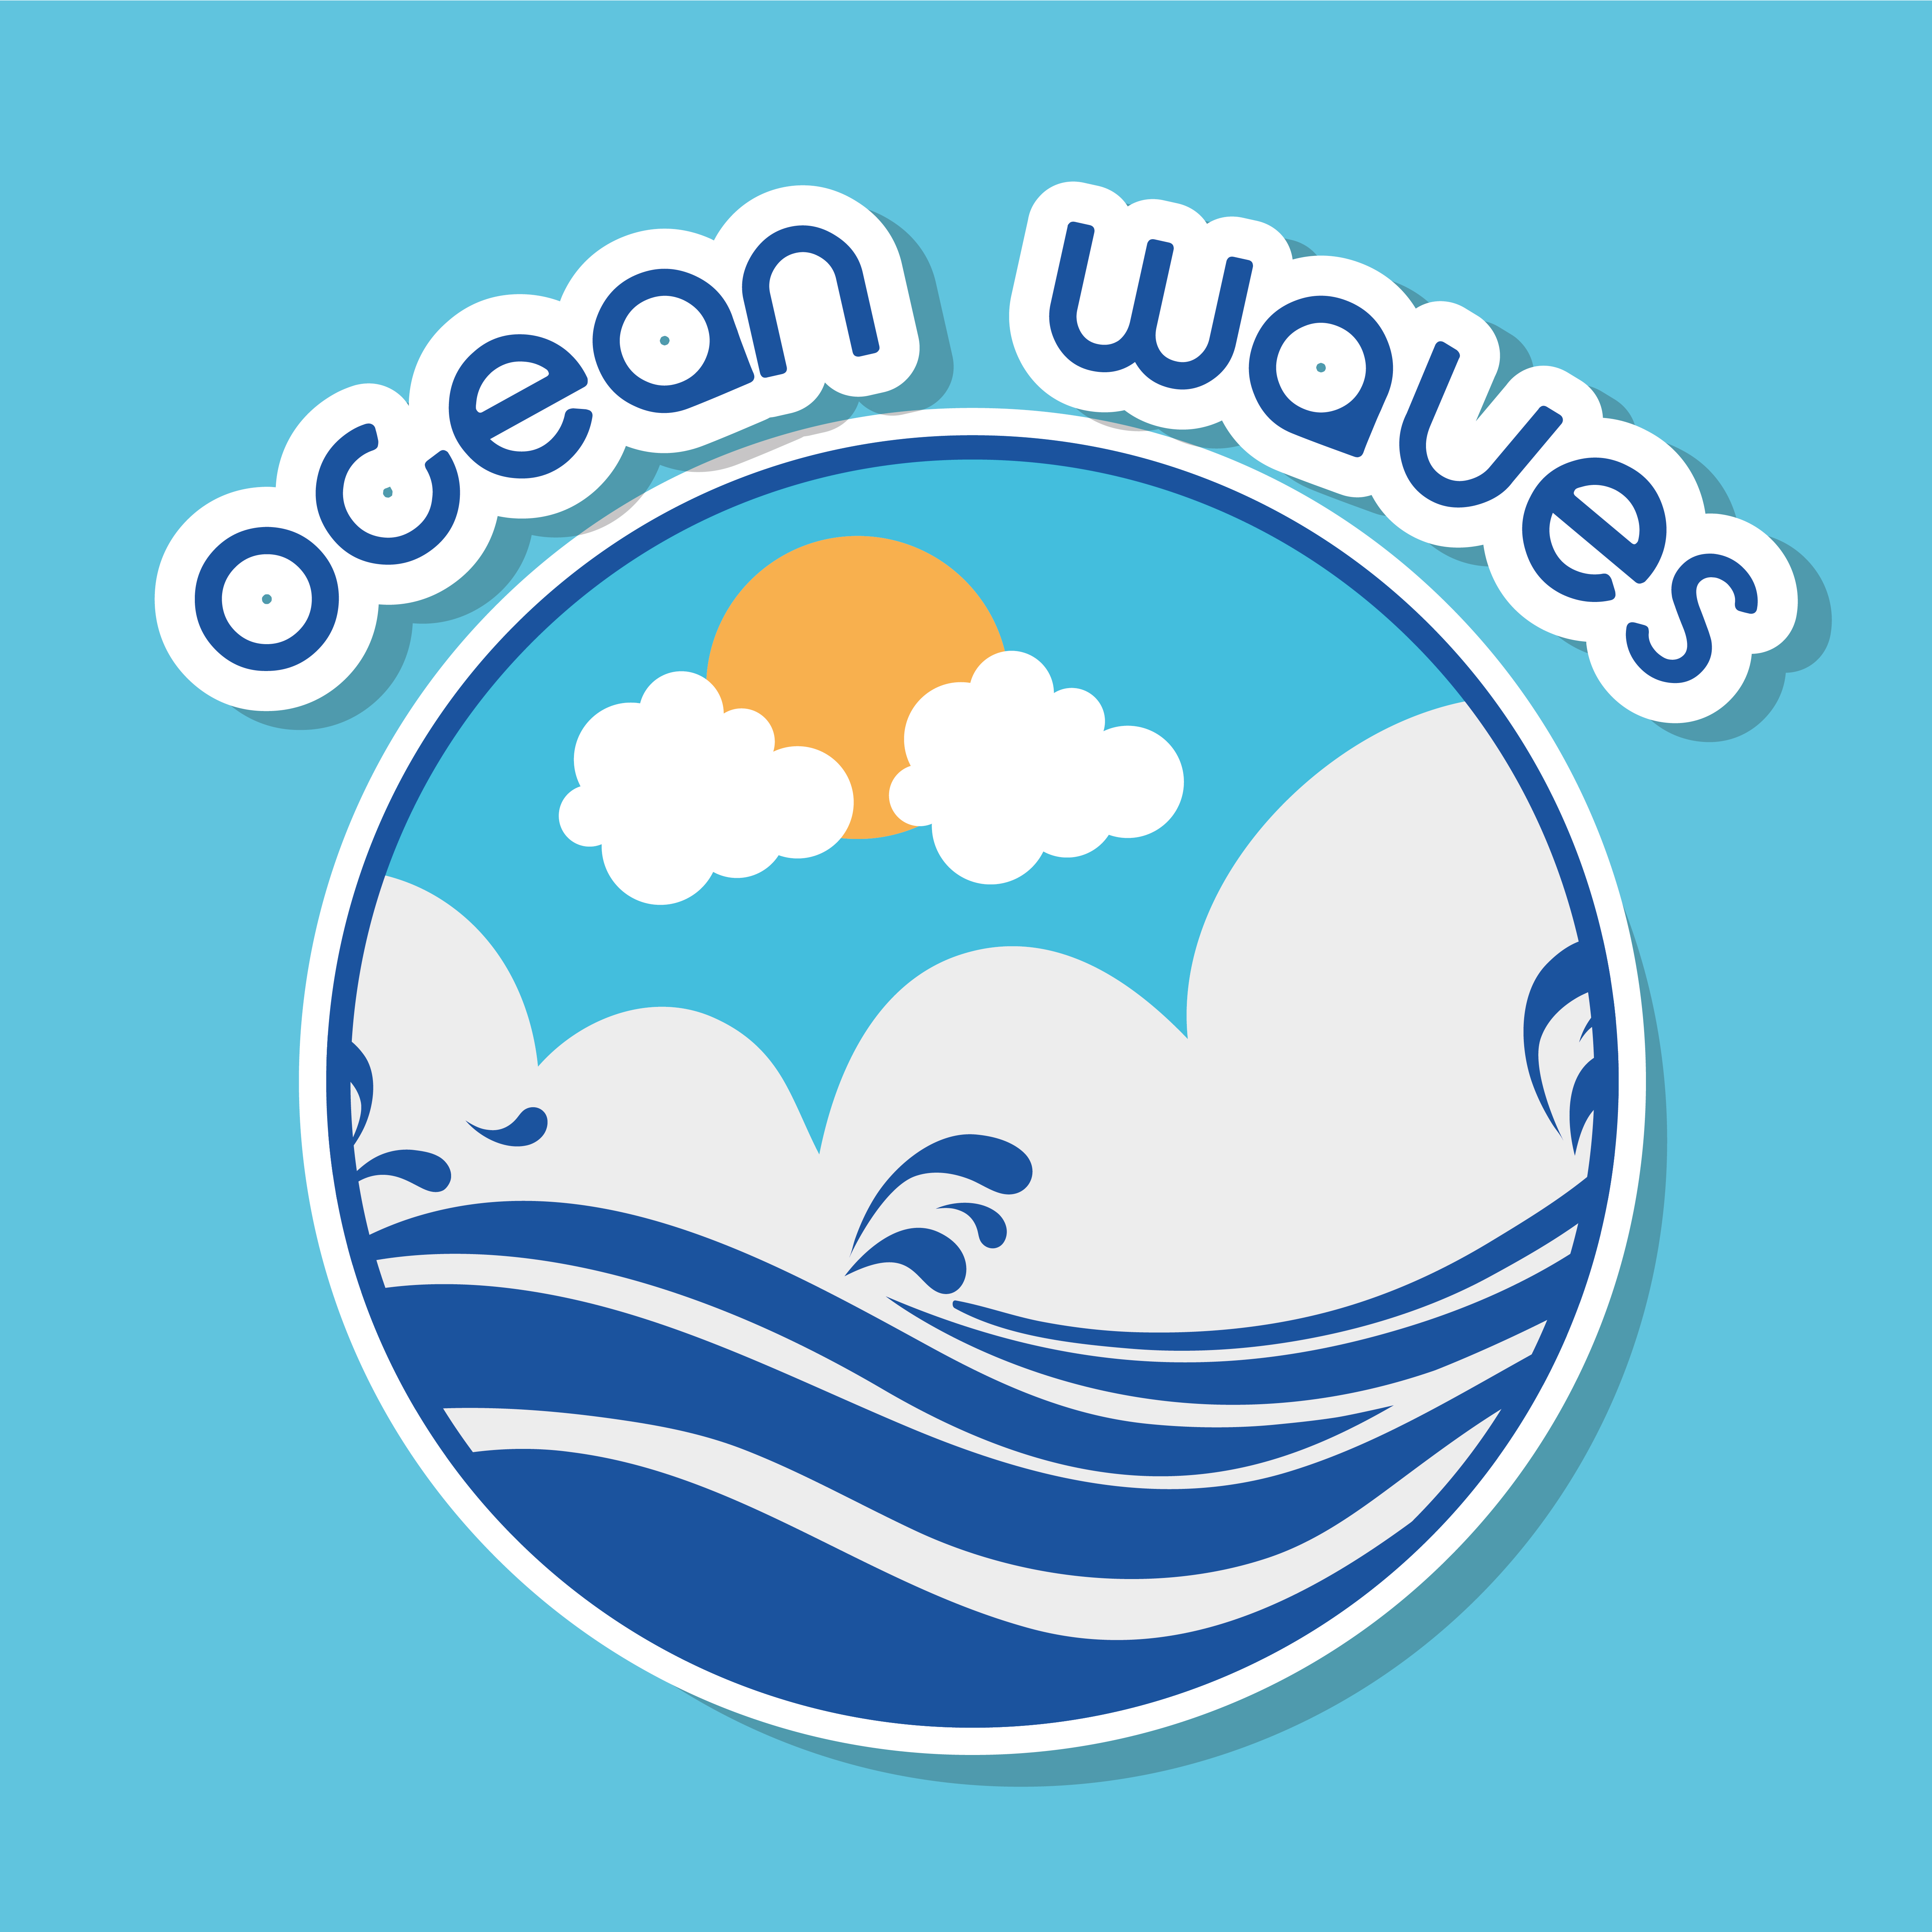 Download ocean waves with lanscape clouds design 635055 - Download Free Vectors, Clipart Graphics ...